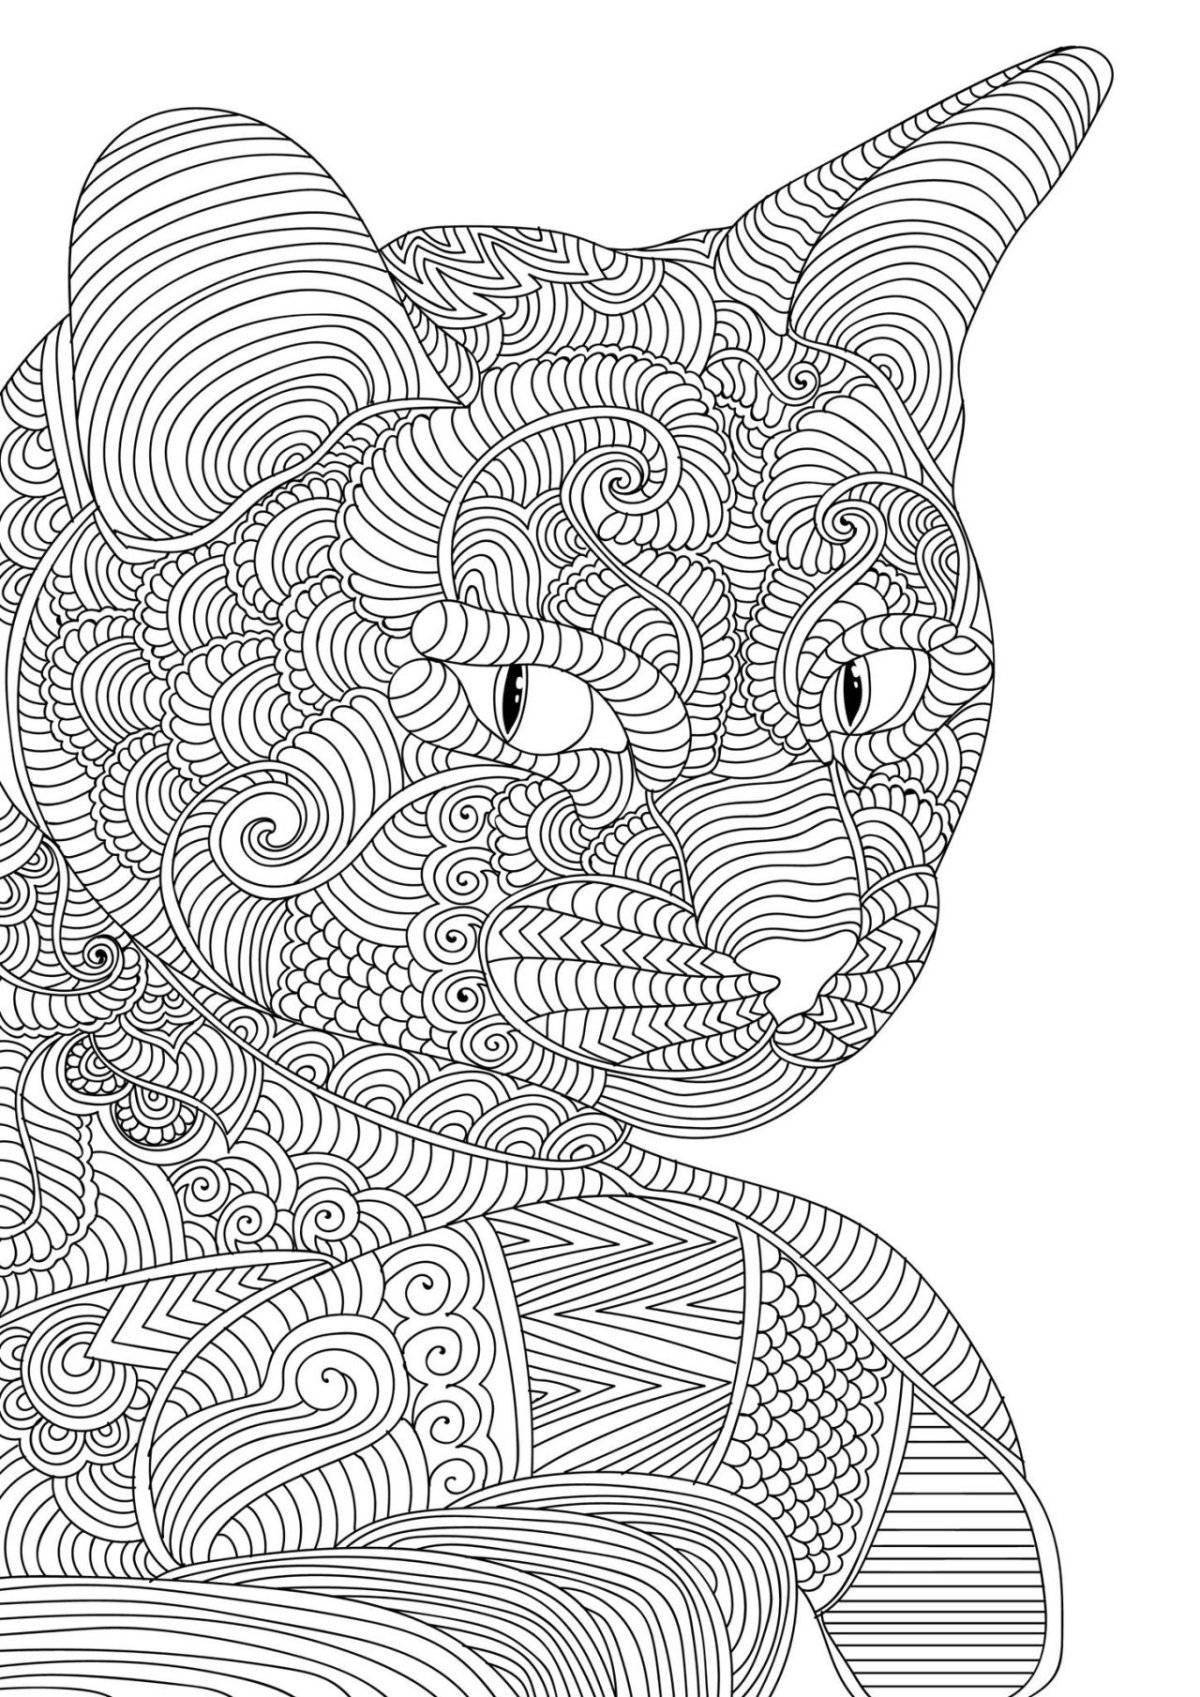 A fascinating set of coloring pages